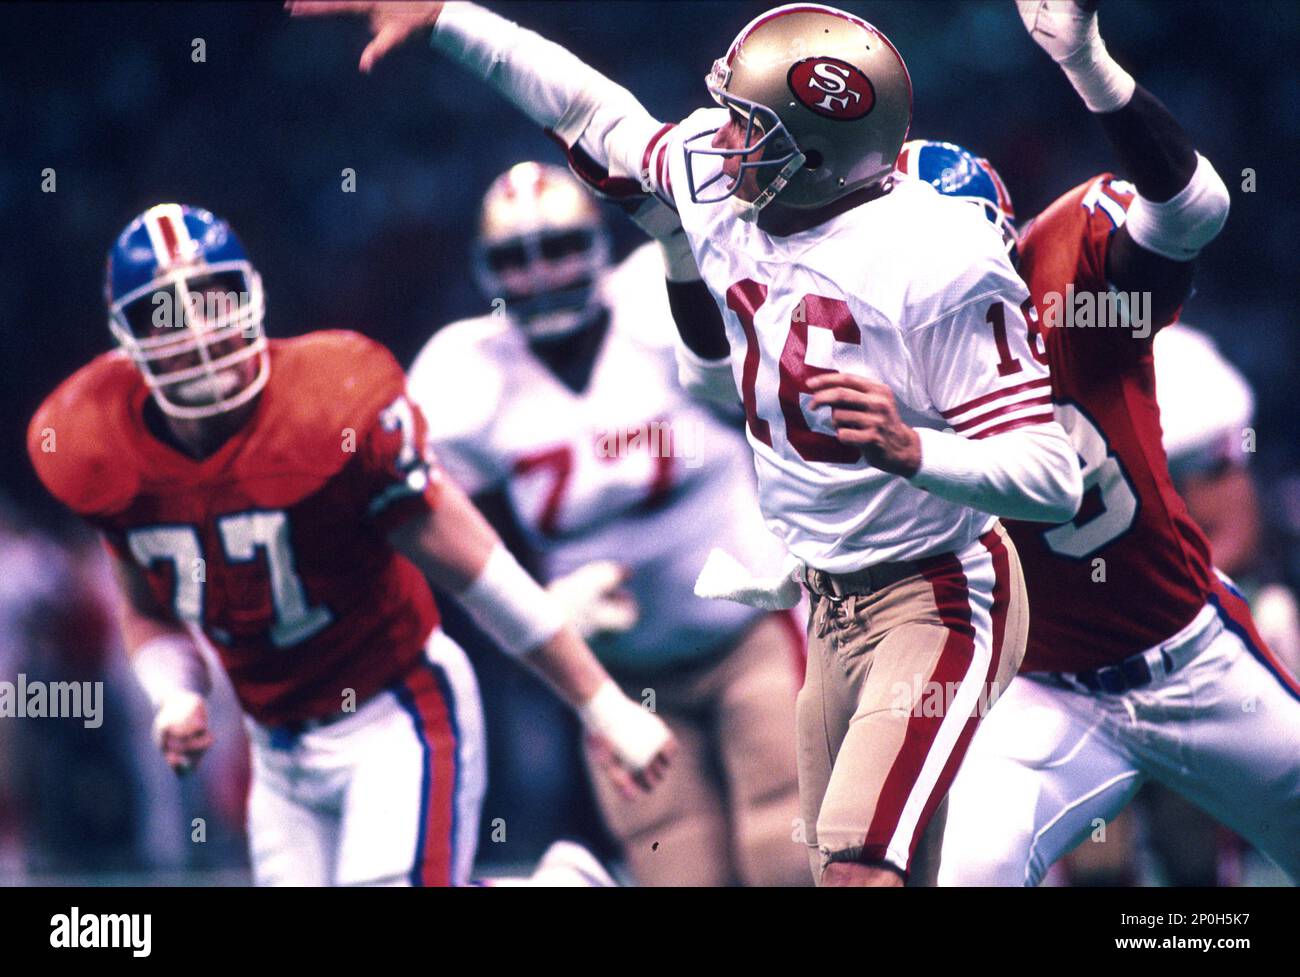 28 Jan 1990: Quarterback Joe Montana of the San Francisco 49ers throws  while pressured during the 49ers 55-10 victory over the Denver Broncos in Super  Bowl XXIV at the Louisiana Superdome in